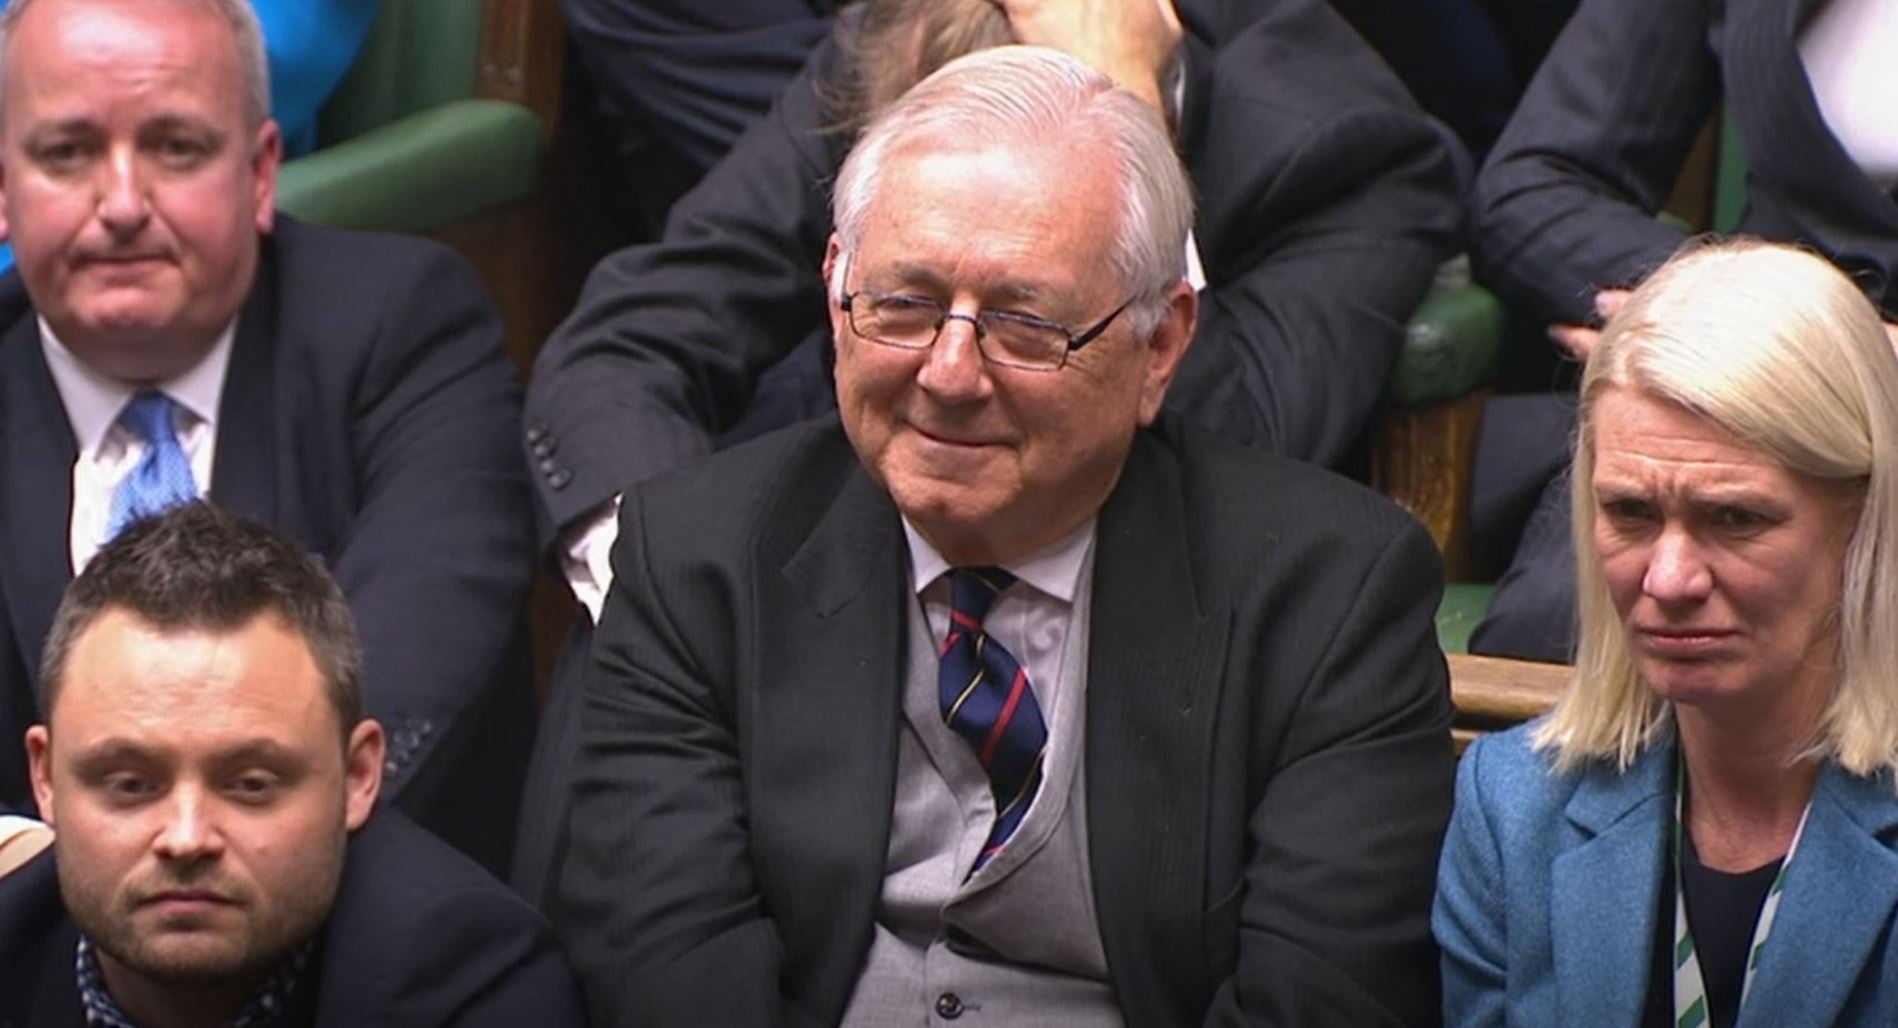 Sir Peter Bottomley has served as a Conservative MP since 1975